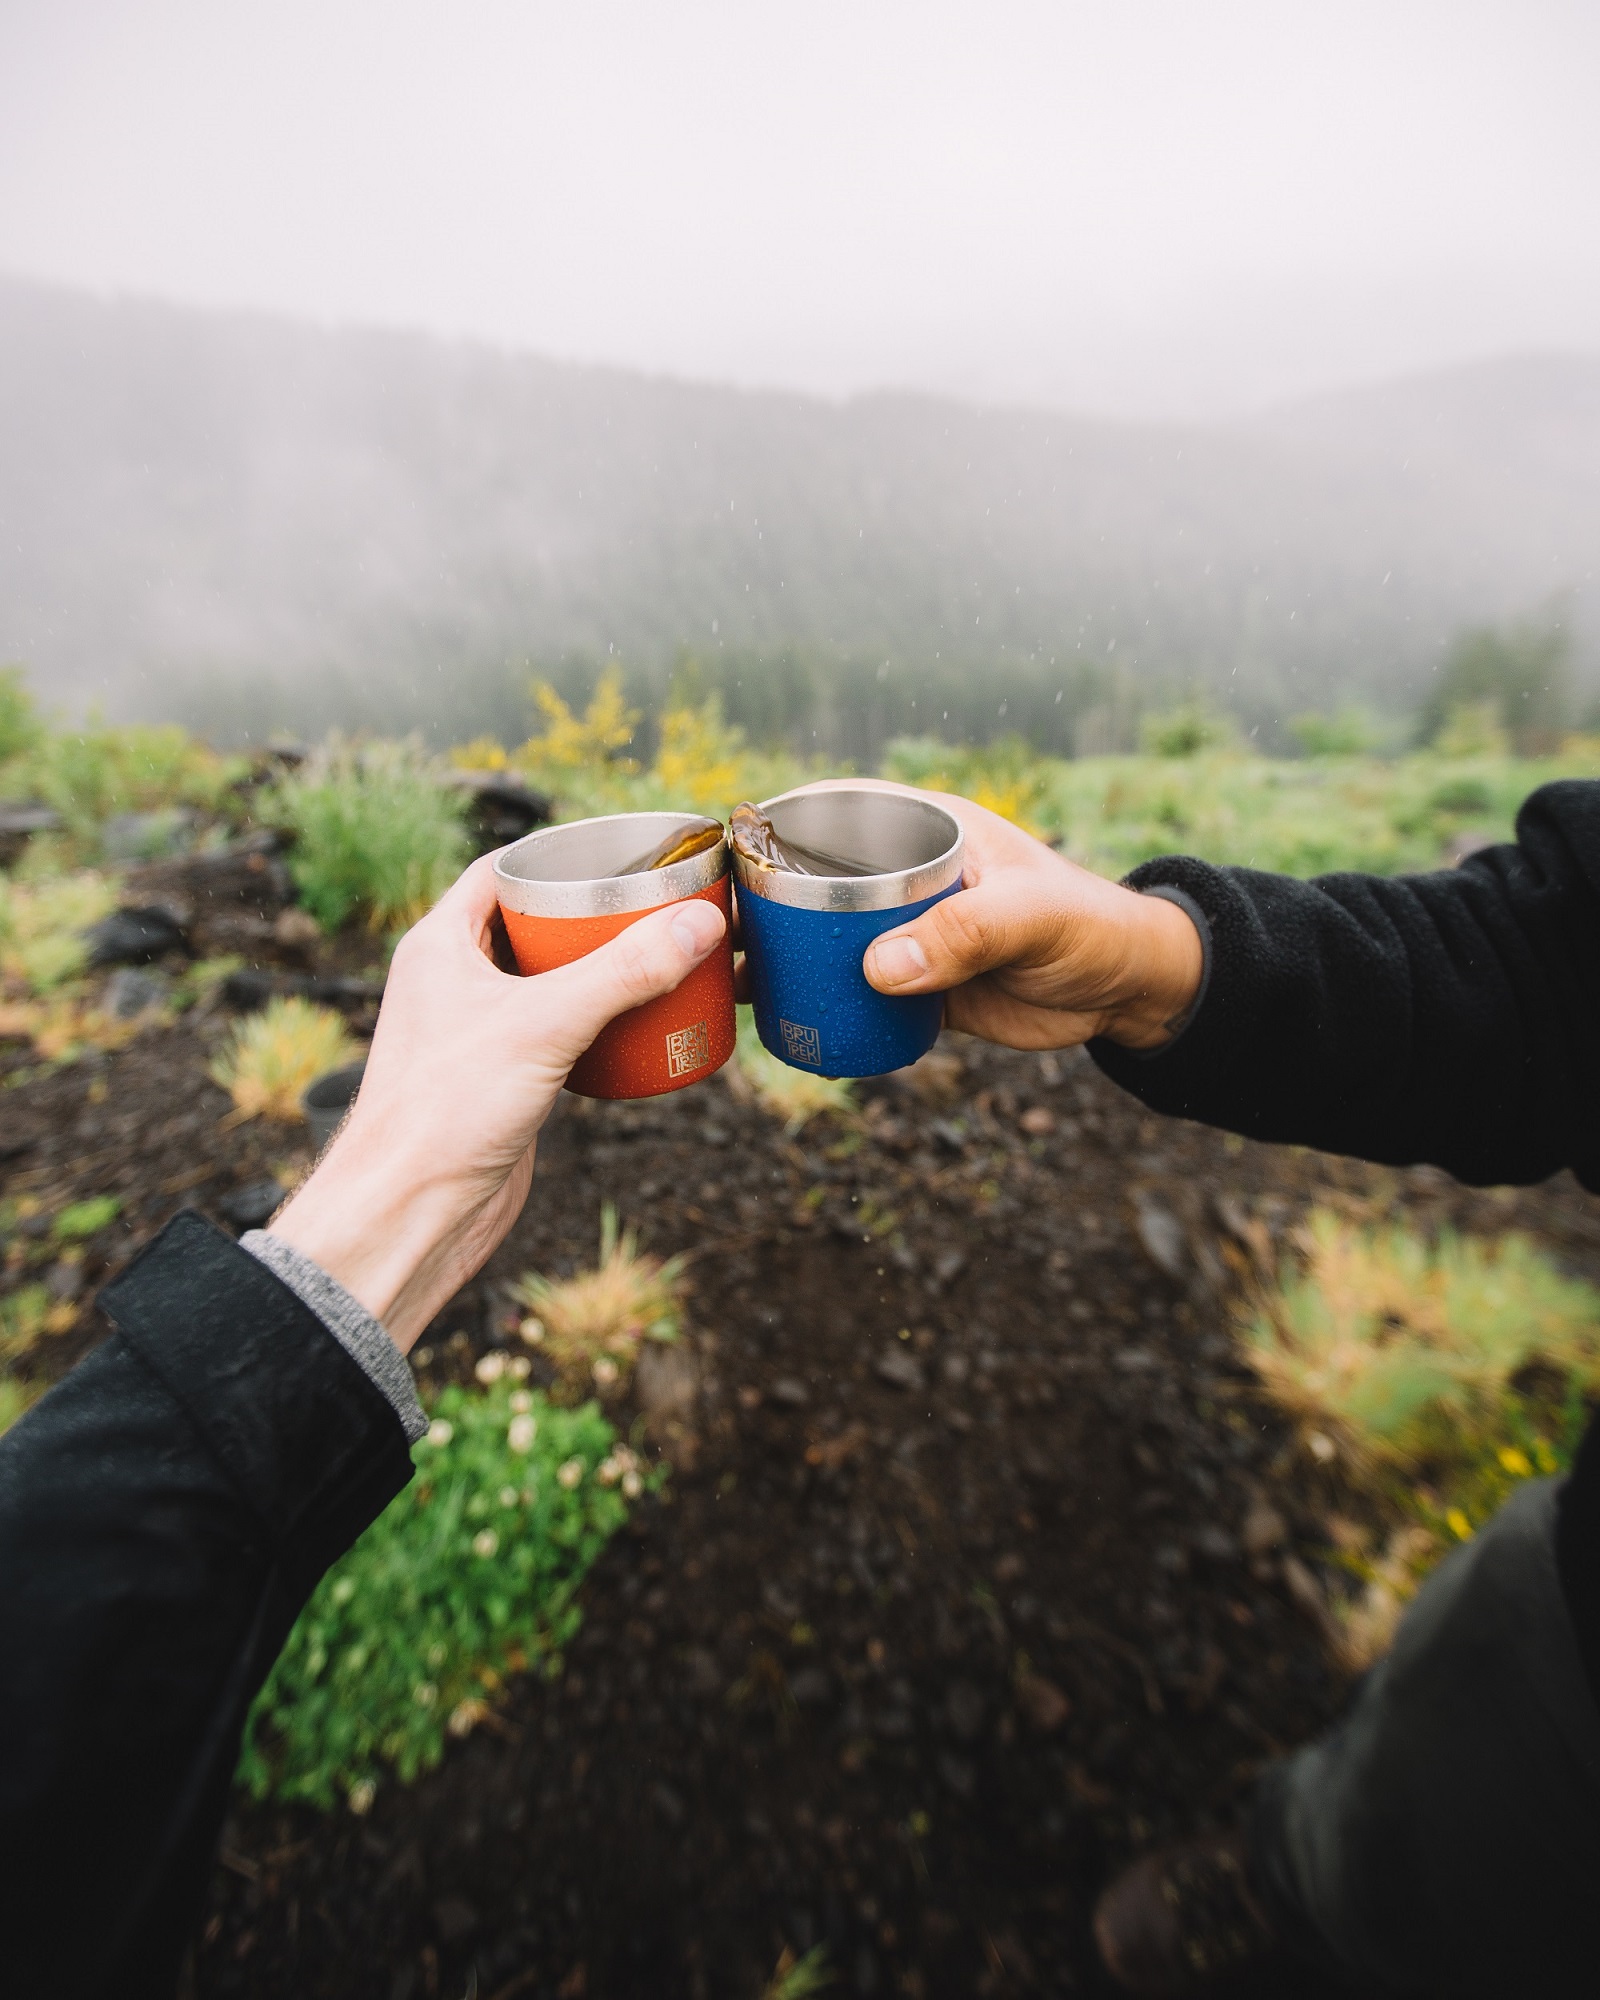 https://planetarydesign.com/wp-content/uploads/2021/02/Cheers-Camp-Cups.jpg